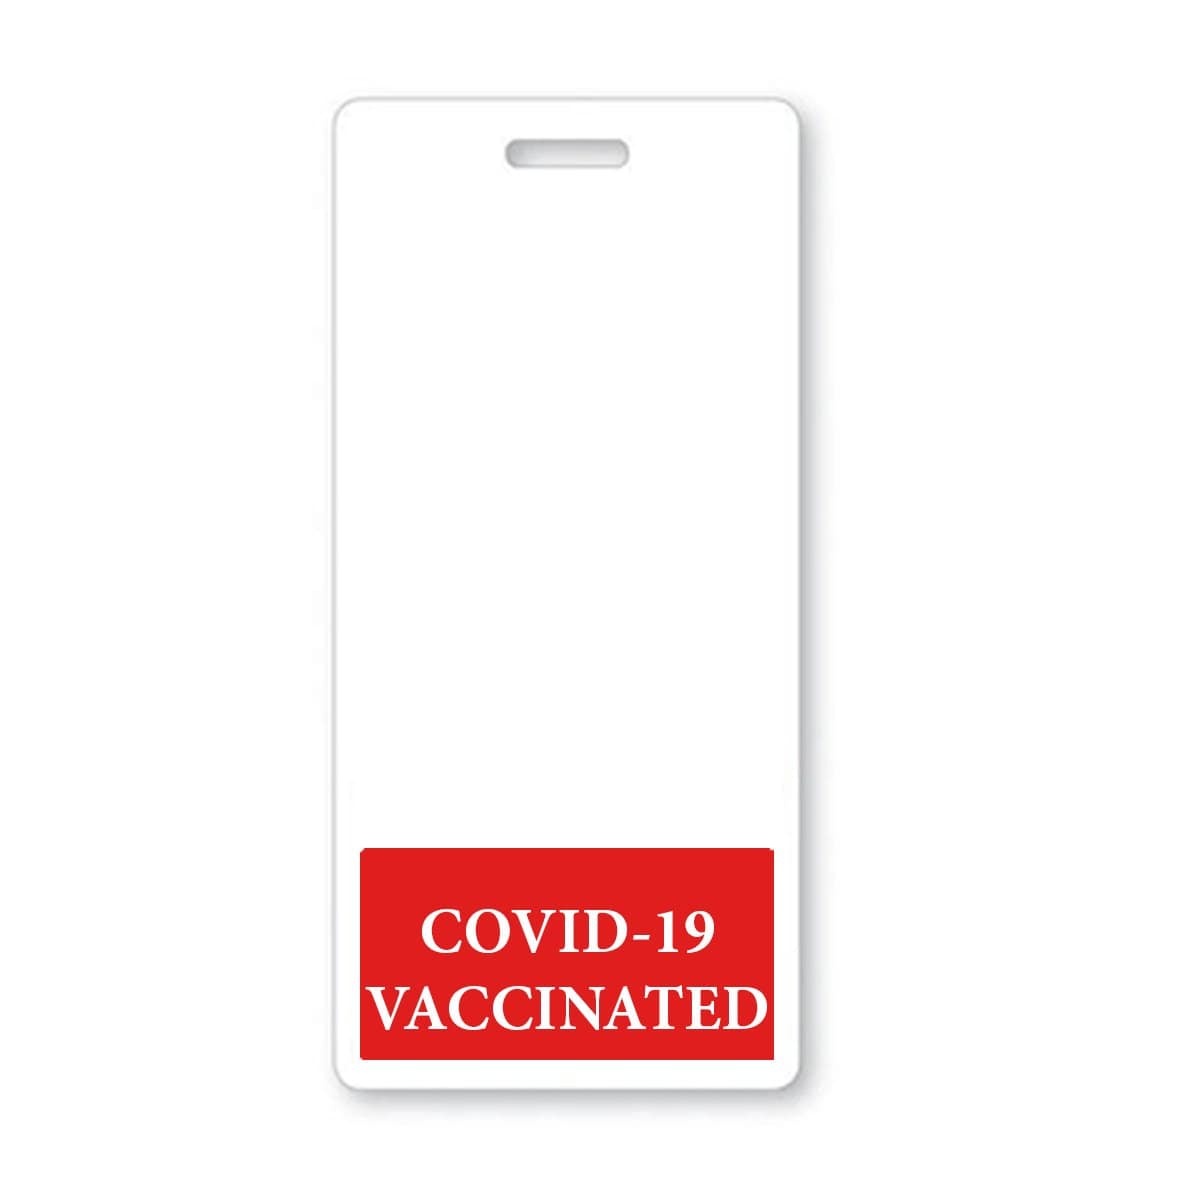 Red COVID-19 VACCINATED Badge Buddy - Vertical Badge Backer with Red Border BB-COVID-19VACCINATED-RED-V